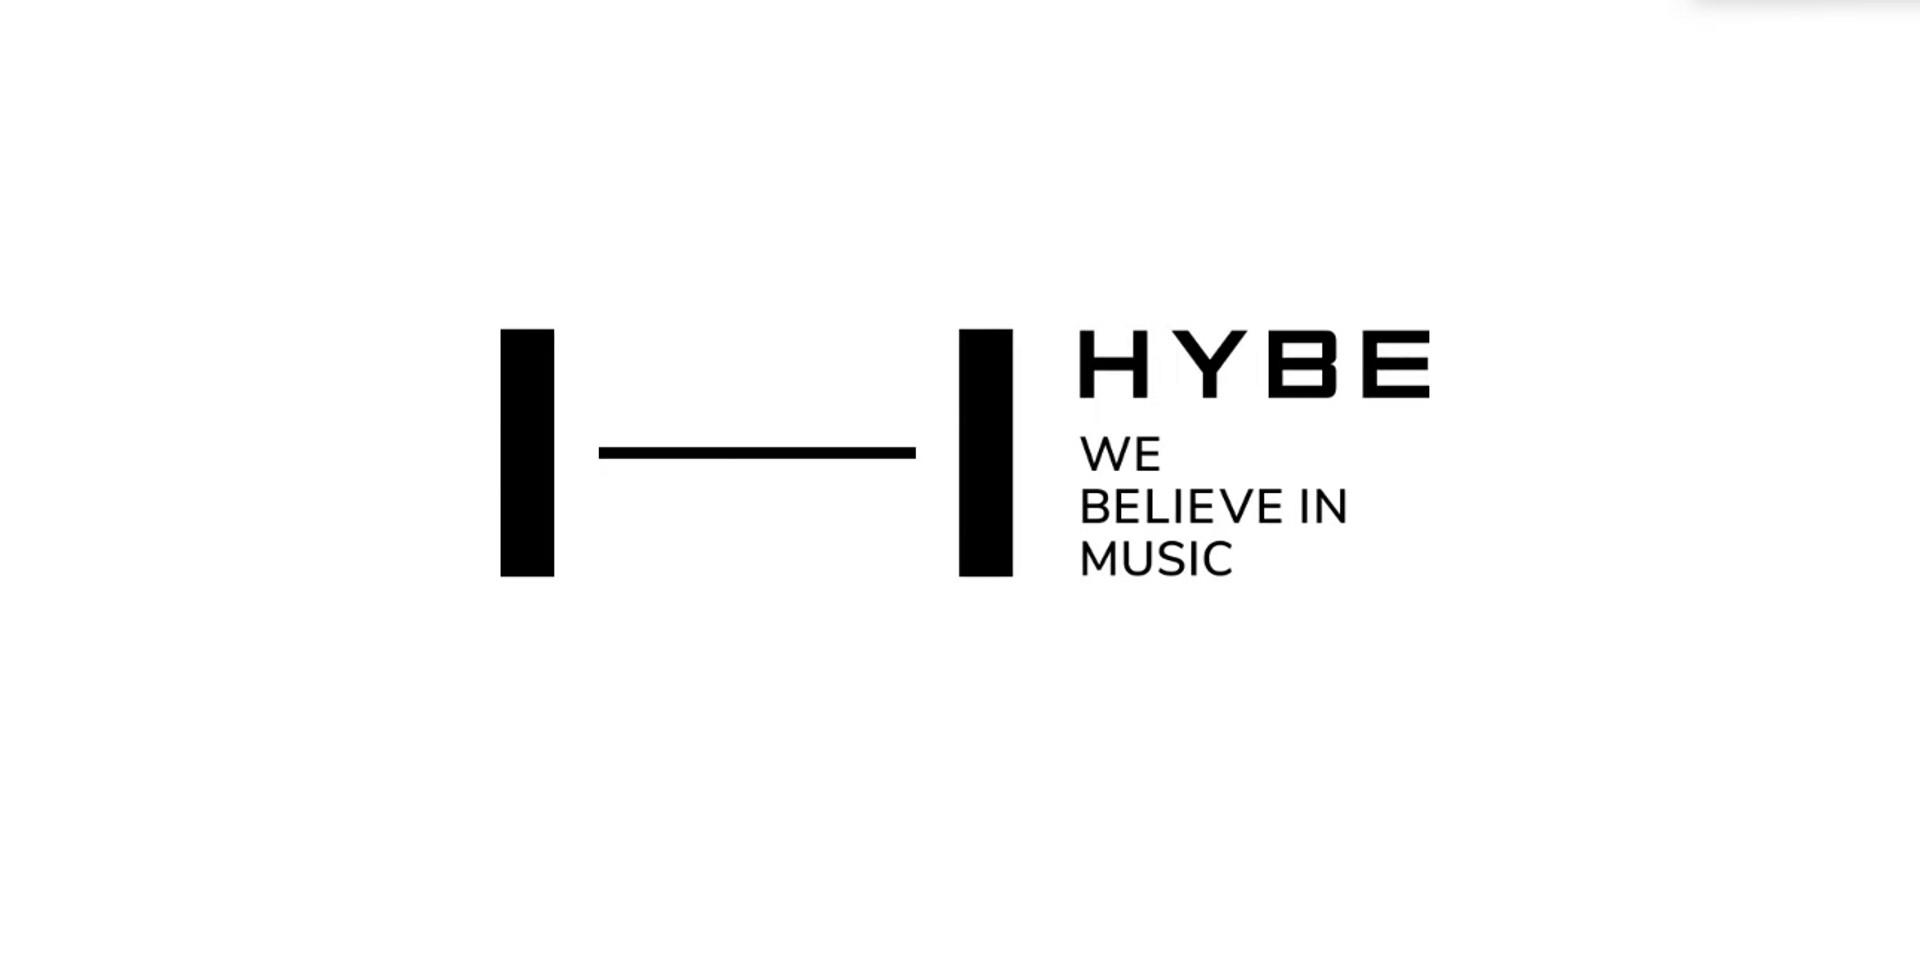 Big Hit Entertainment starts anew with HYBE, here's what you need to know